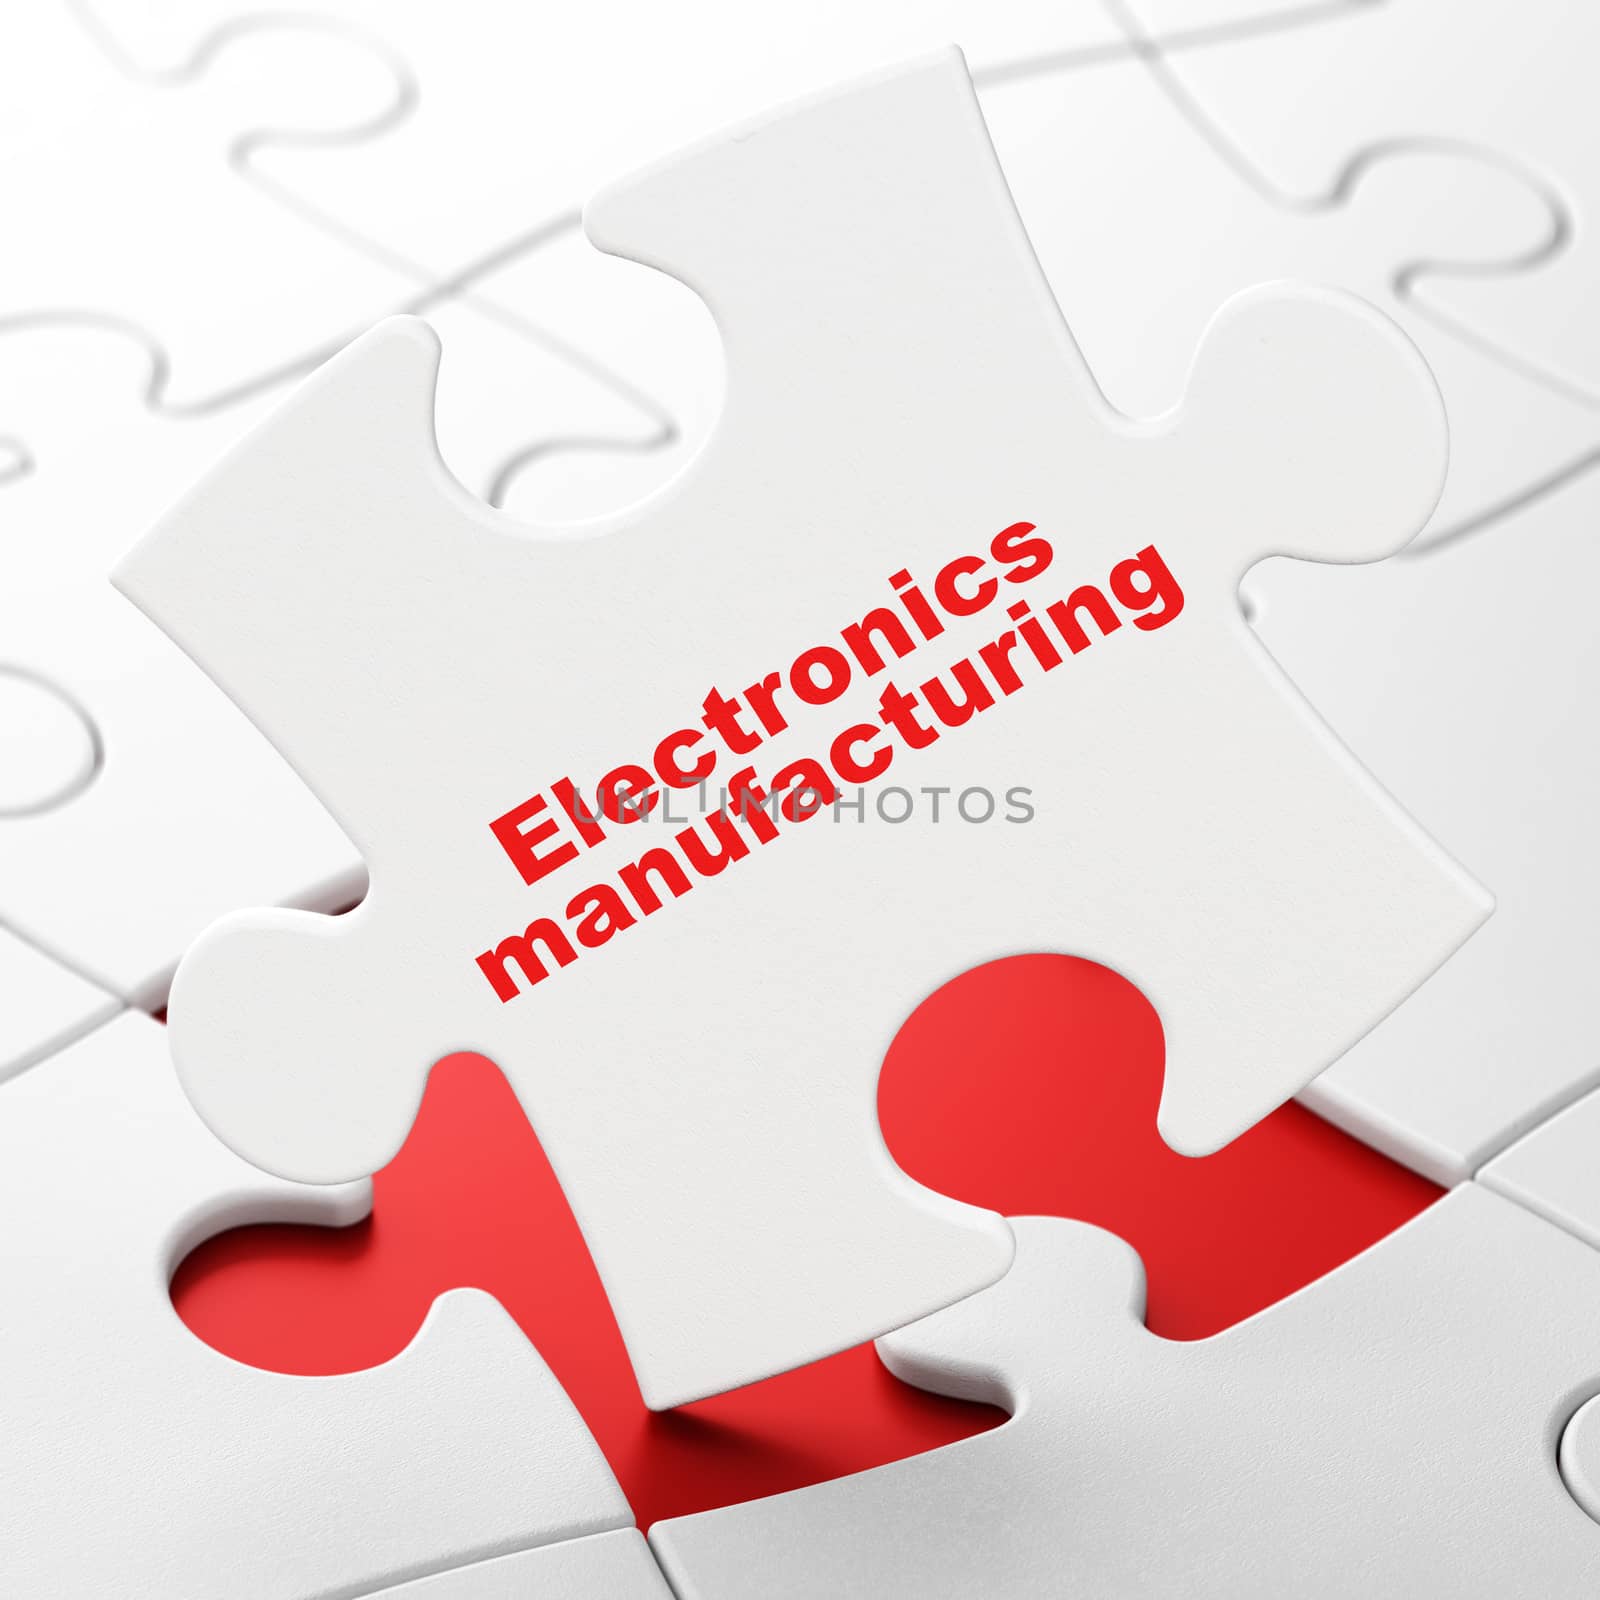 Manufacuring concept: Electronics Manufacturing on puzzle background by maxkabakov